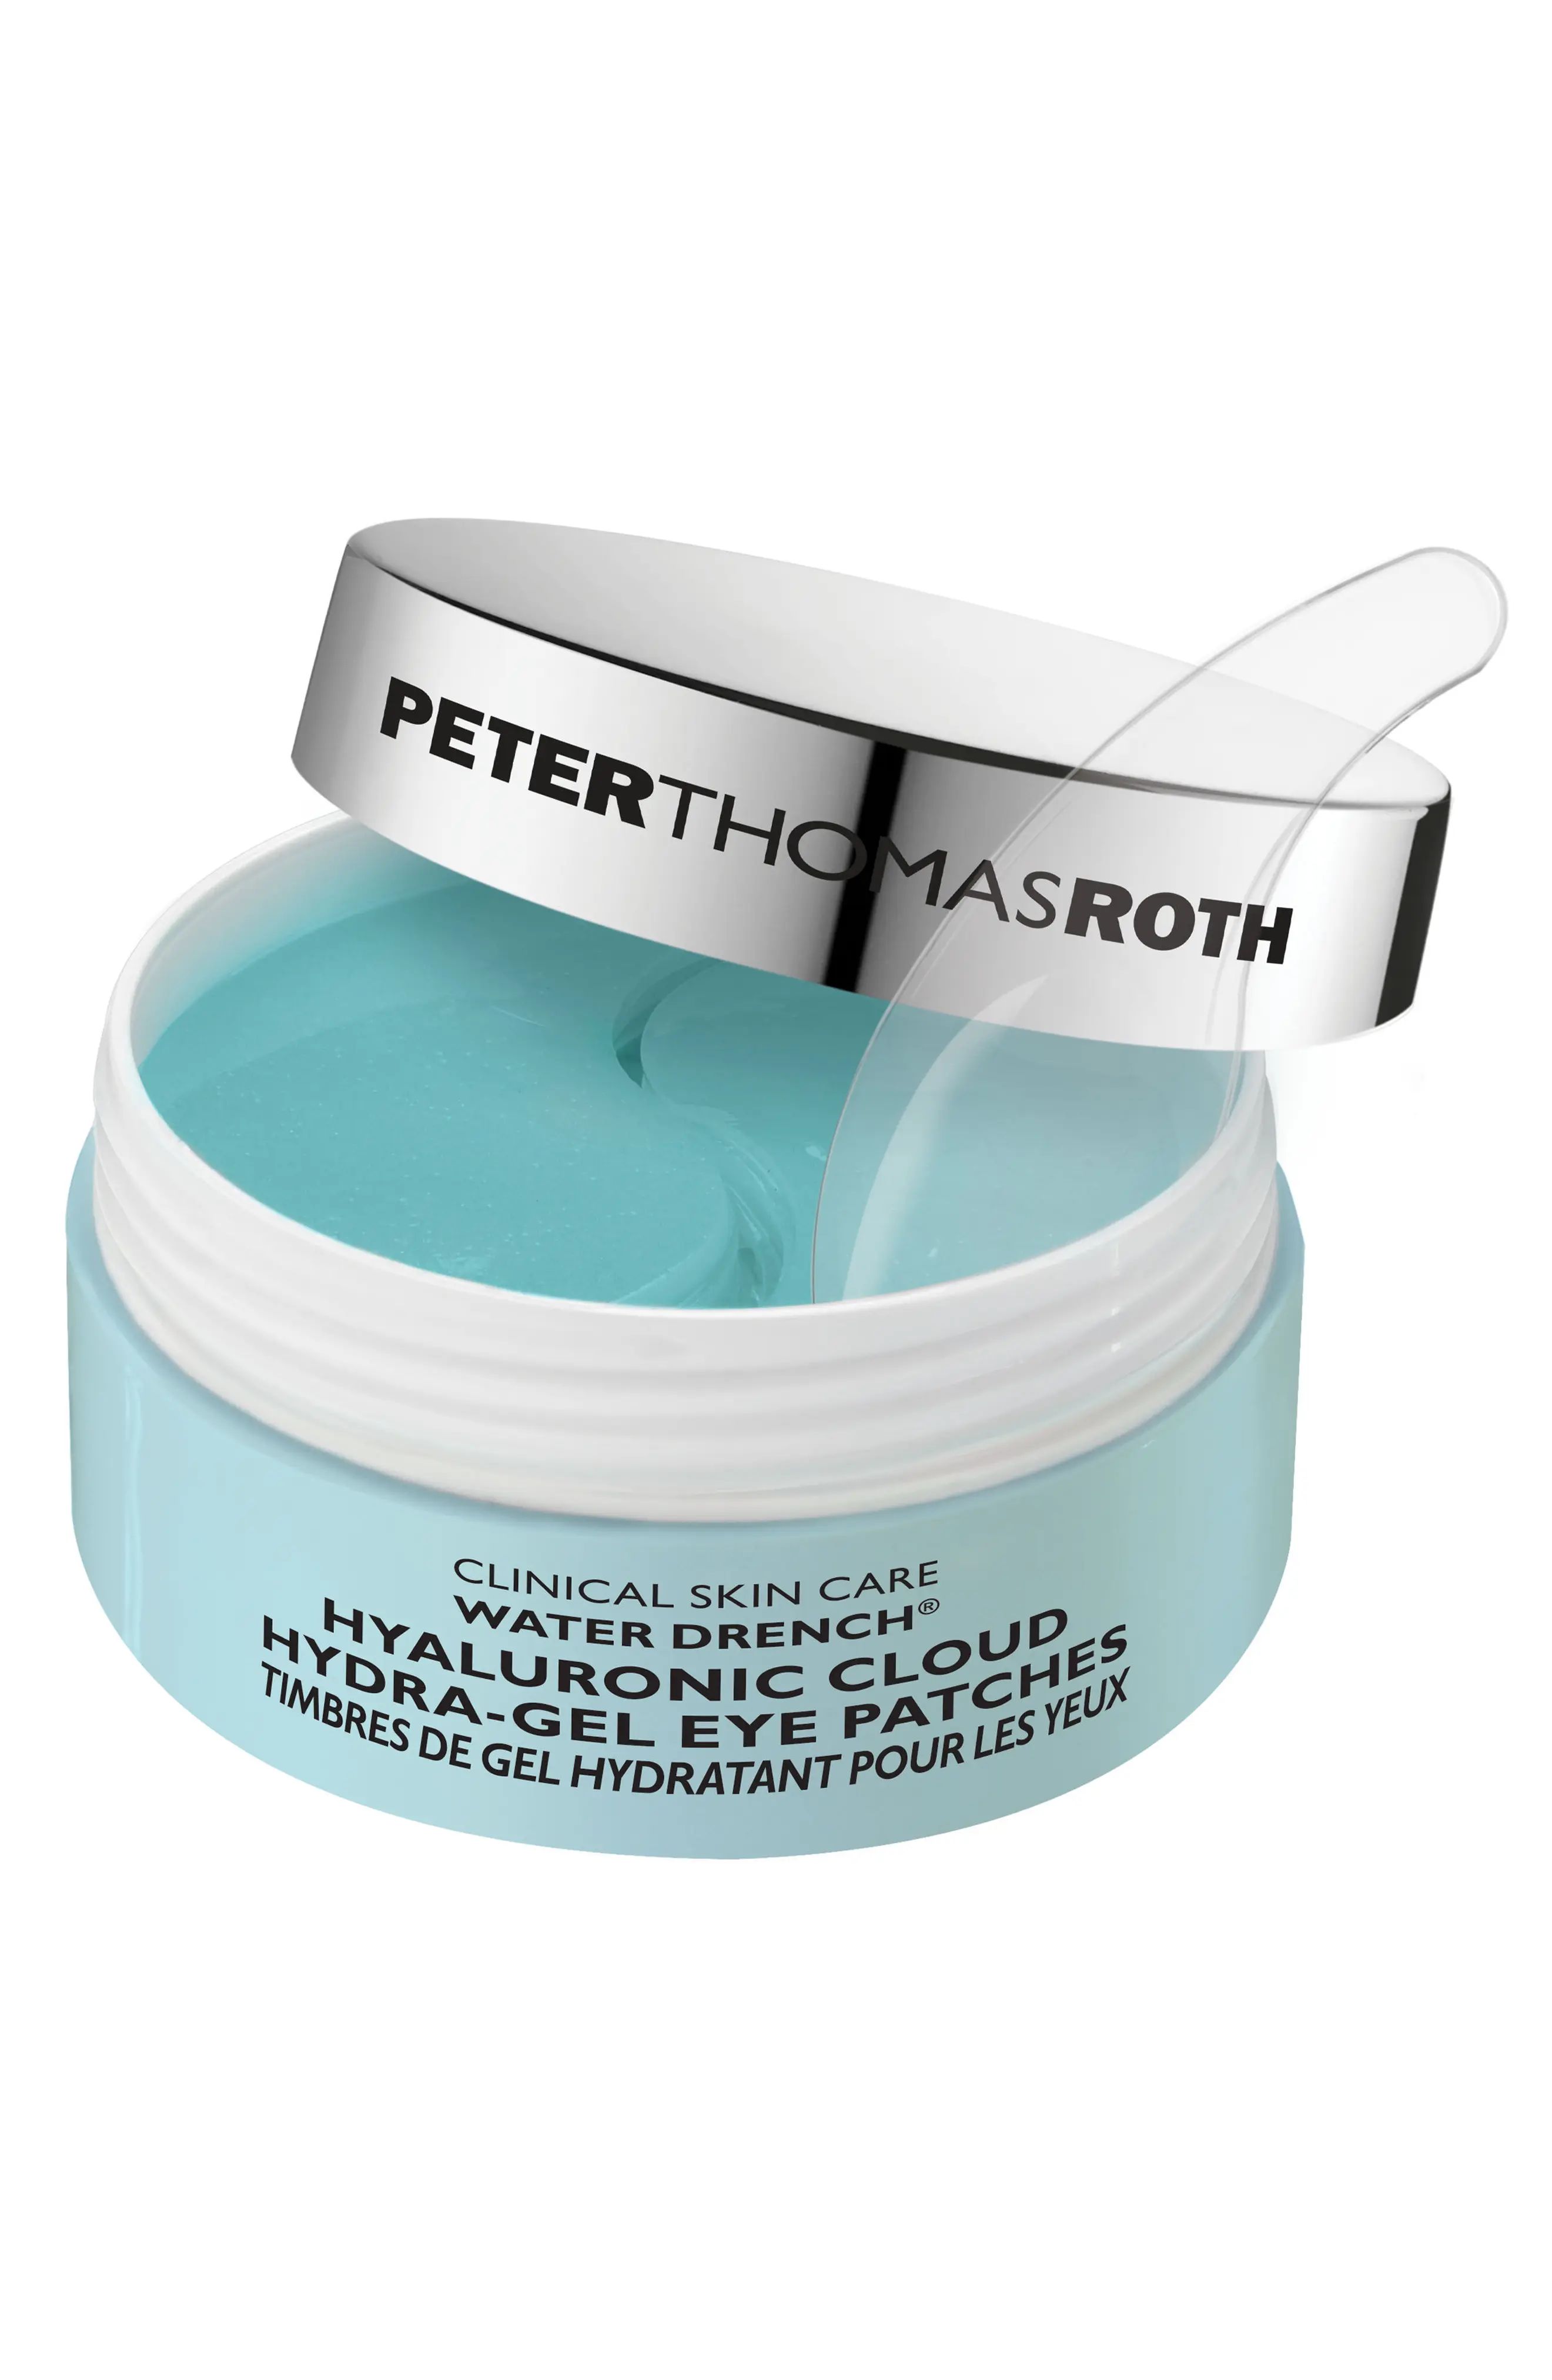 Peter Thomas Roth Water Drench Hyaluronic Cloud Hydra-Gel Eye Patches at Nordstrom | Nordstrom